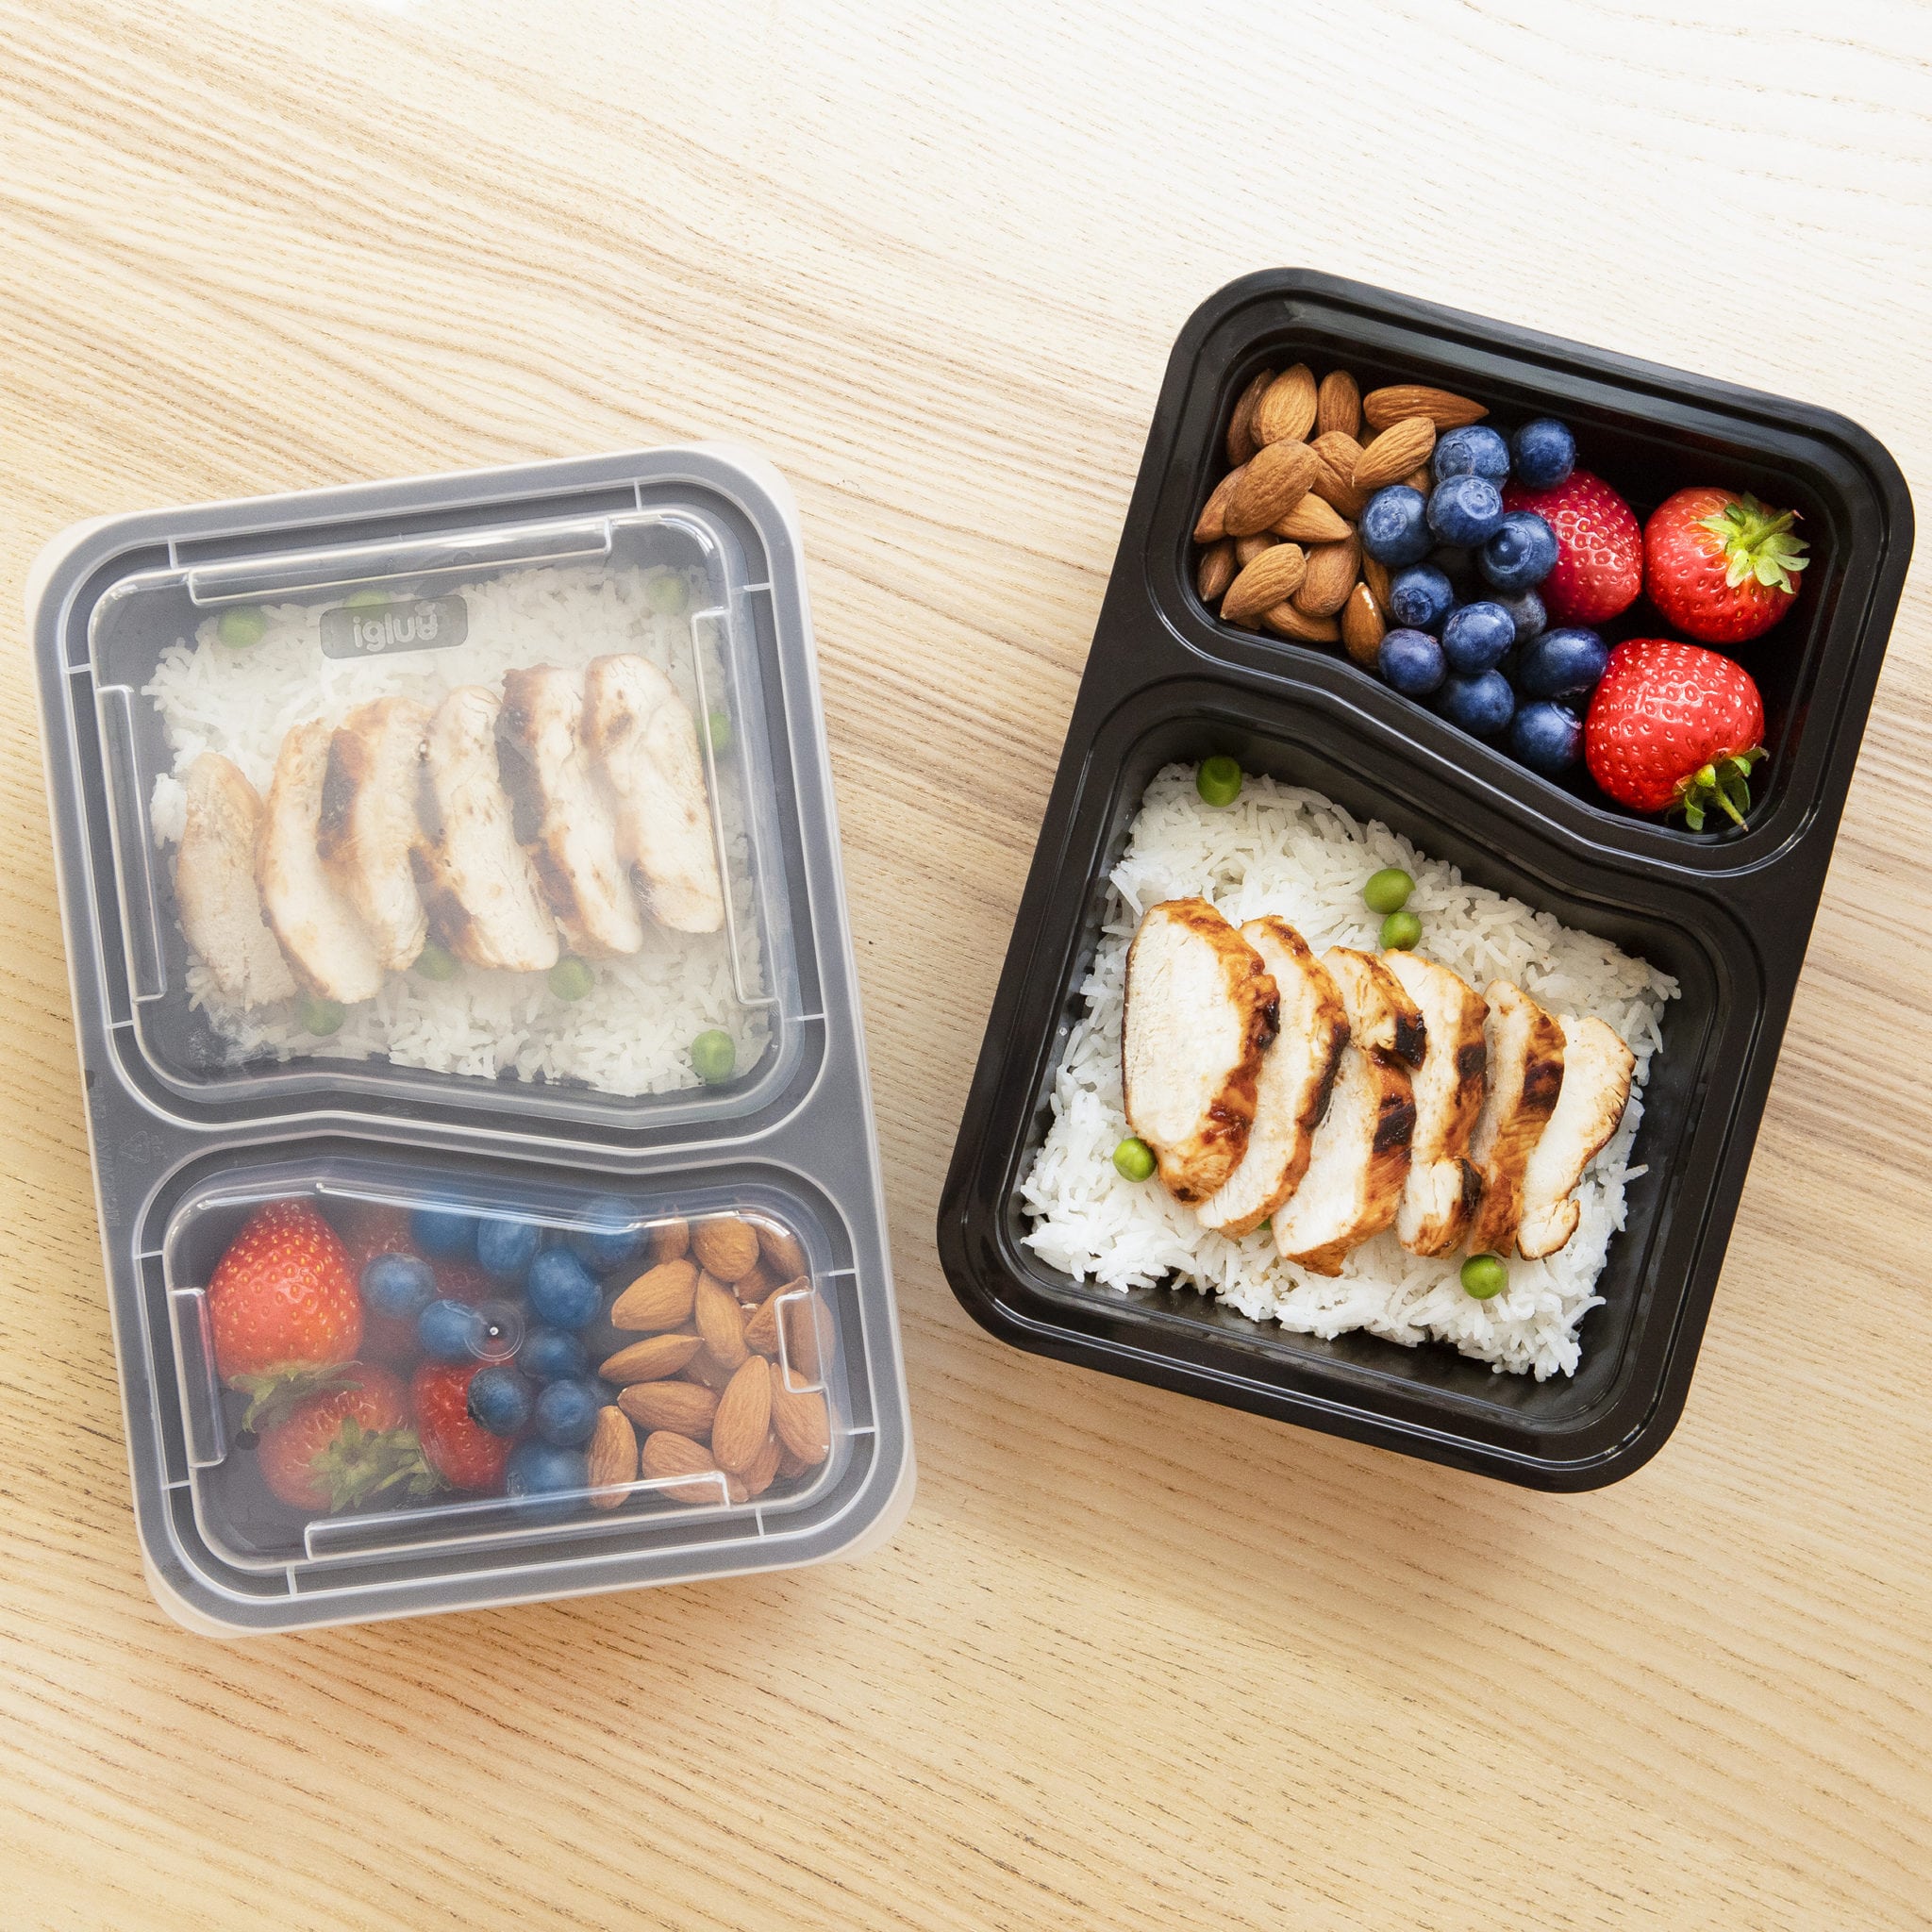 Igluu Meal Prep Containers [10 pack] 1 Compartment with Airtight Lids -  Plastic Food Storage Bento B…See more Igluu Meal Prep Containers [10 pack]  1